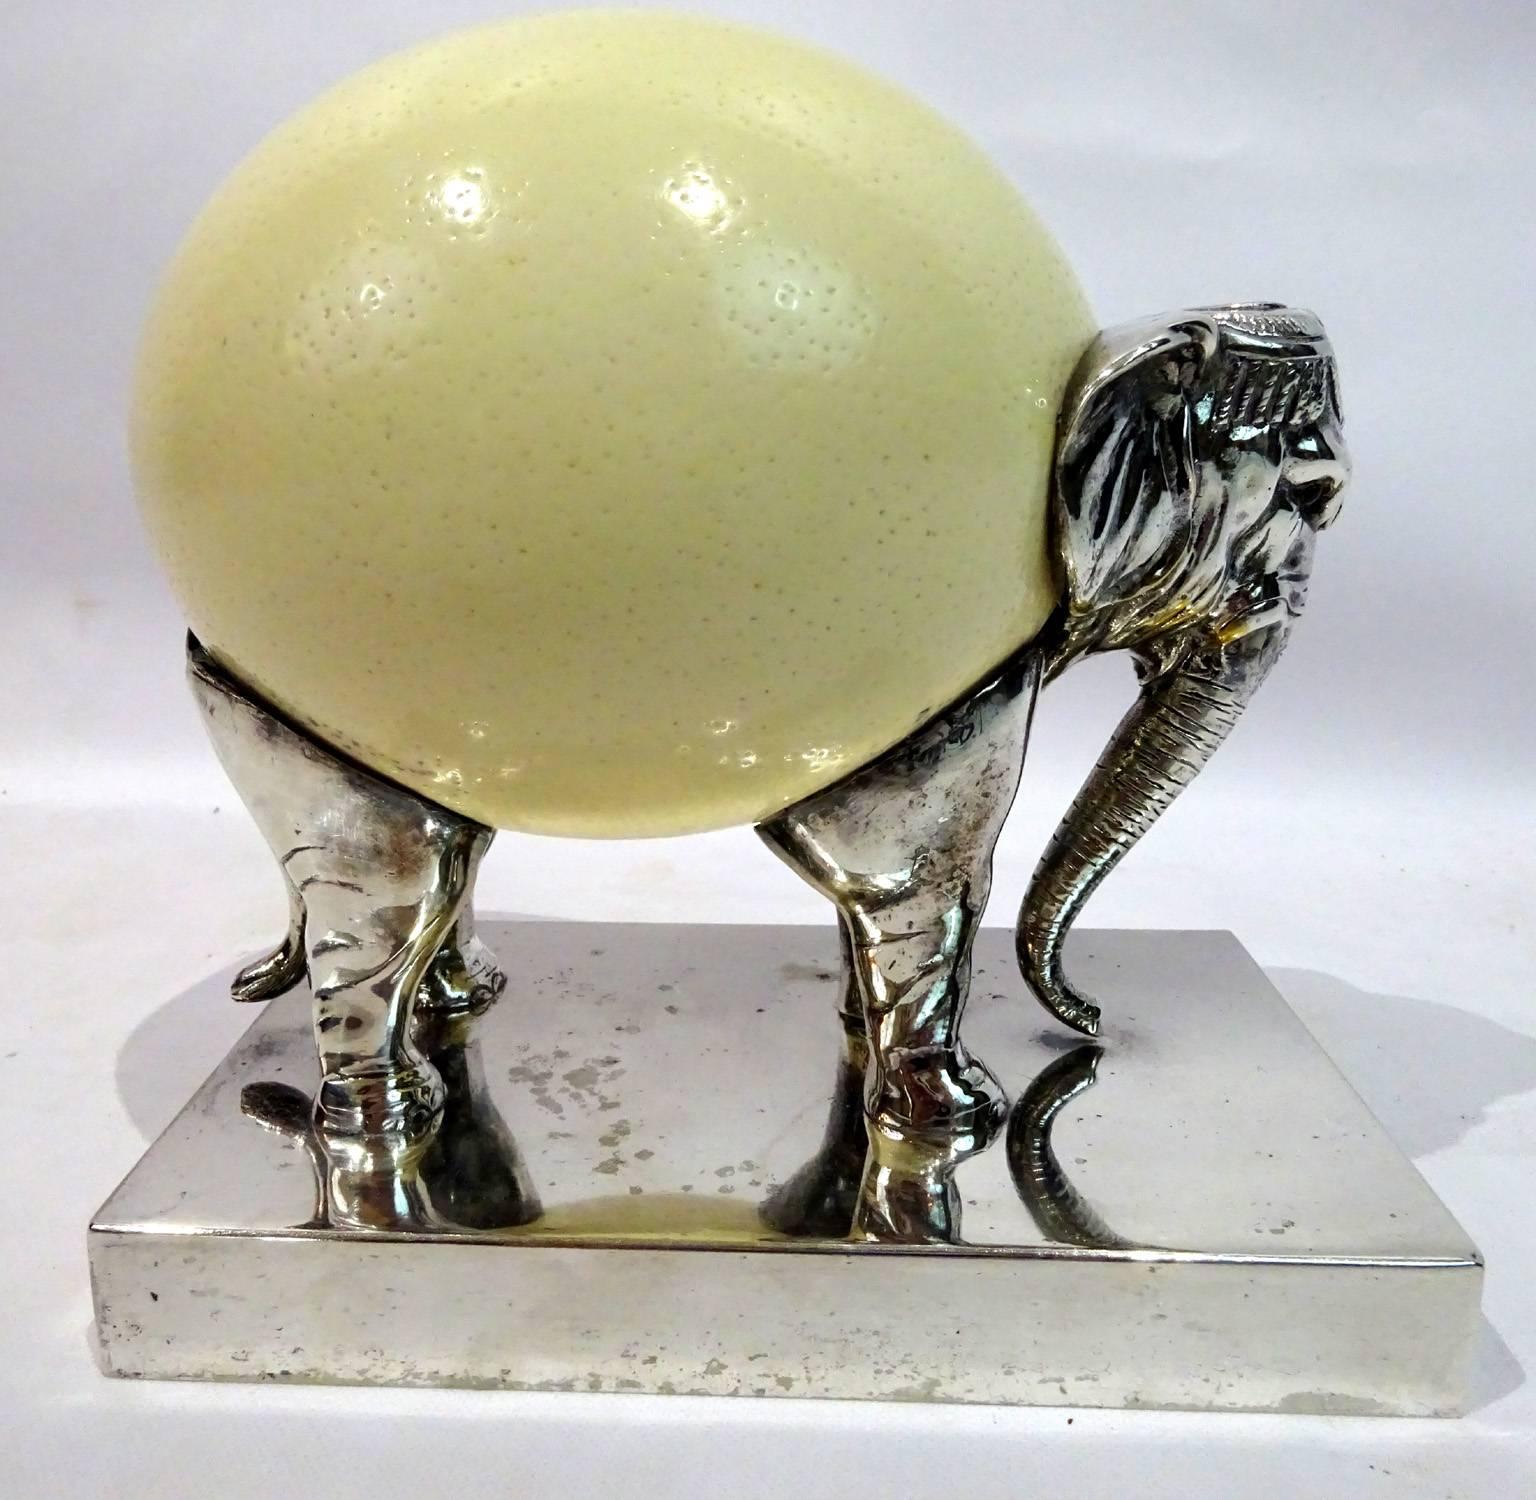 Ostrich Eggshell Late 20th Century Ostrich Egg and Silver Elephant Sculpture by J Antony Redmile